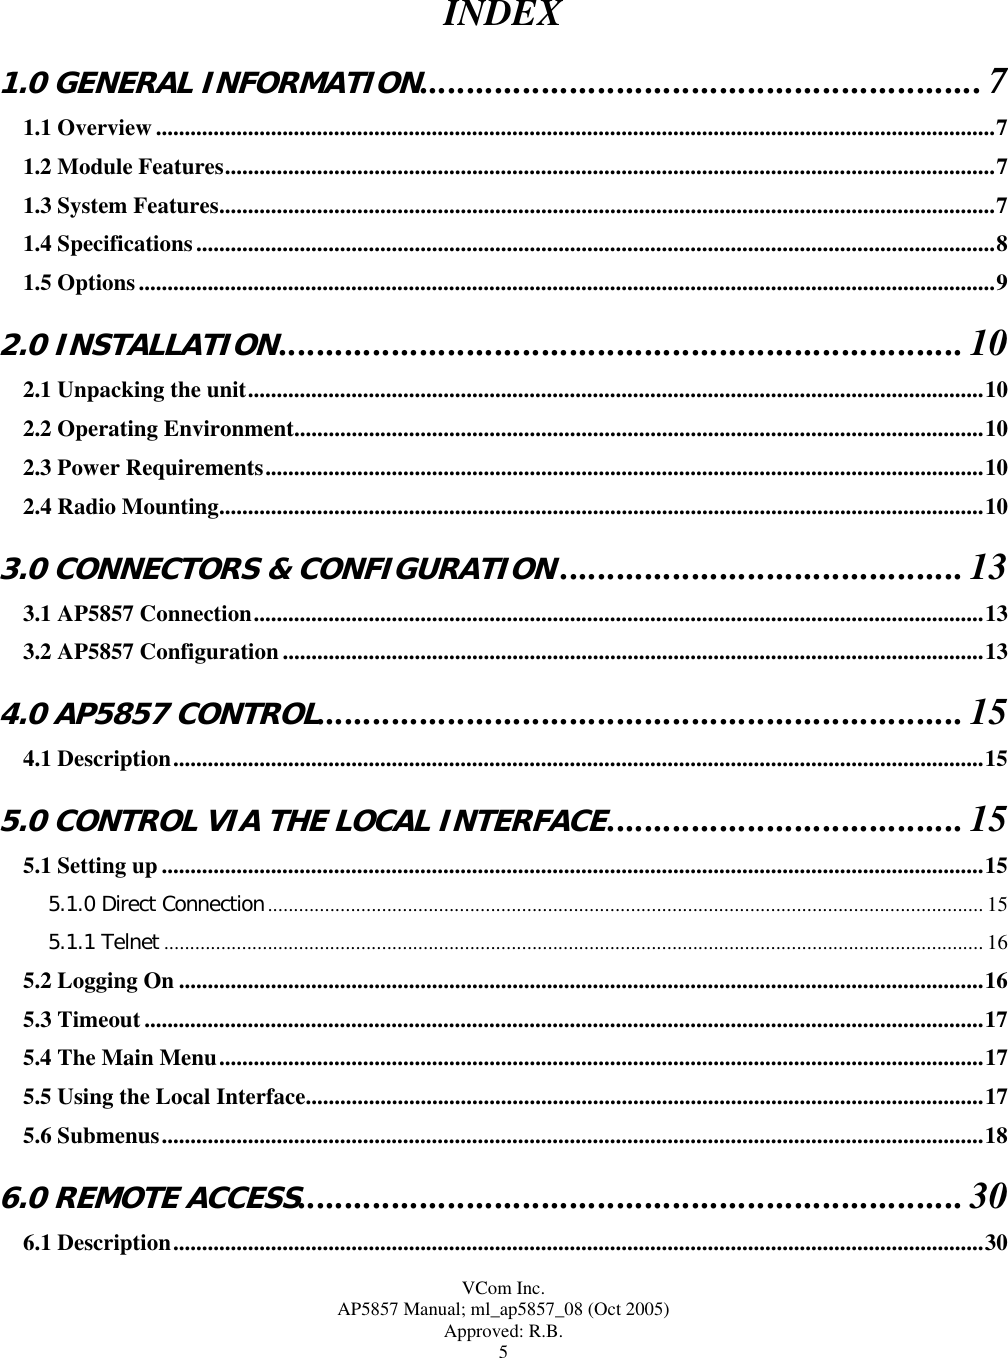  VCom Inc. AP5857 Manual; ml_ap5857_08 (Oct 2005) Approved: R.B. 5 INDEX  1.0 GENERAL INFORMATION............................................................7 1.1 Overview ..................................................................................................................................................7 1.2 Module Features......................................................................................................................................7 1.3 System Features.......................................................................................................................................7 1.4 Specifications...........................................................................................................................................8 1.5 Options.....................................................................................................................................................9 2.0 INSTALLATION.........................................................................10 2.1 Unpacking the unit................................................................................................................................10 2.2 Operating Environment........................................................................................................................10 2.3 Power Requirements.............................................................................................................................10 2.4 Radio Mounting.....................................................................................................................................10 3.0 CONNECTORS &amp; CONFIGURATION...........................................13 3.1 AP5857 Connection...............................................................................................................................13 3.2 AP5857 Configuration ..........................................................................................................................13 4.0 AP5857 CONTROL.....................................................................15 4.1 Description.............................................................................................................................................15 5.0 CONTROL VIA THE LOCAL INTERFACE......................................15 5.1 Setting up ...............................................................................................................................................15 5.1.0 Direct Connection.......................................................................................................................................... 15 5.1.1 Telnet .............................................................................................................................................................. 16 5.2 Logging On ............................................................................................................................................16 5.3 Timeout ..................................................................................................................................................17 5.4 The Main Menu.....................................................................................................................................17 5.5 Using the Local Interface......................................................................................................................17 5.6 Submenus...............................................................................................................................................18 6.0 REMOTE ACCESS.......................................................................30 6.1 Description.............................................................................................................................................30 